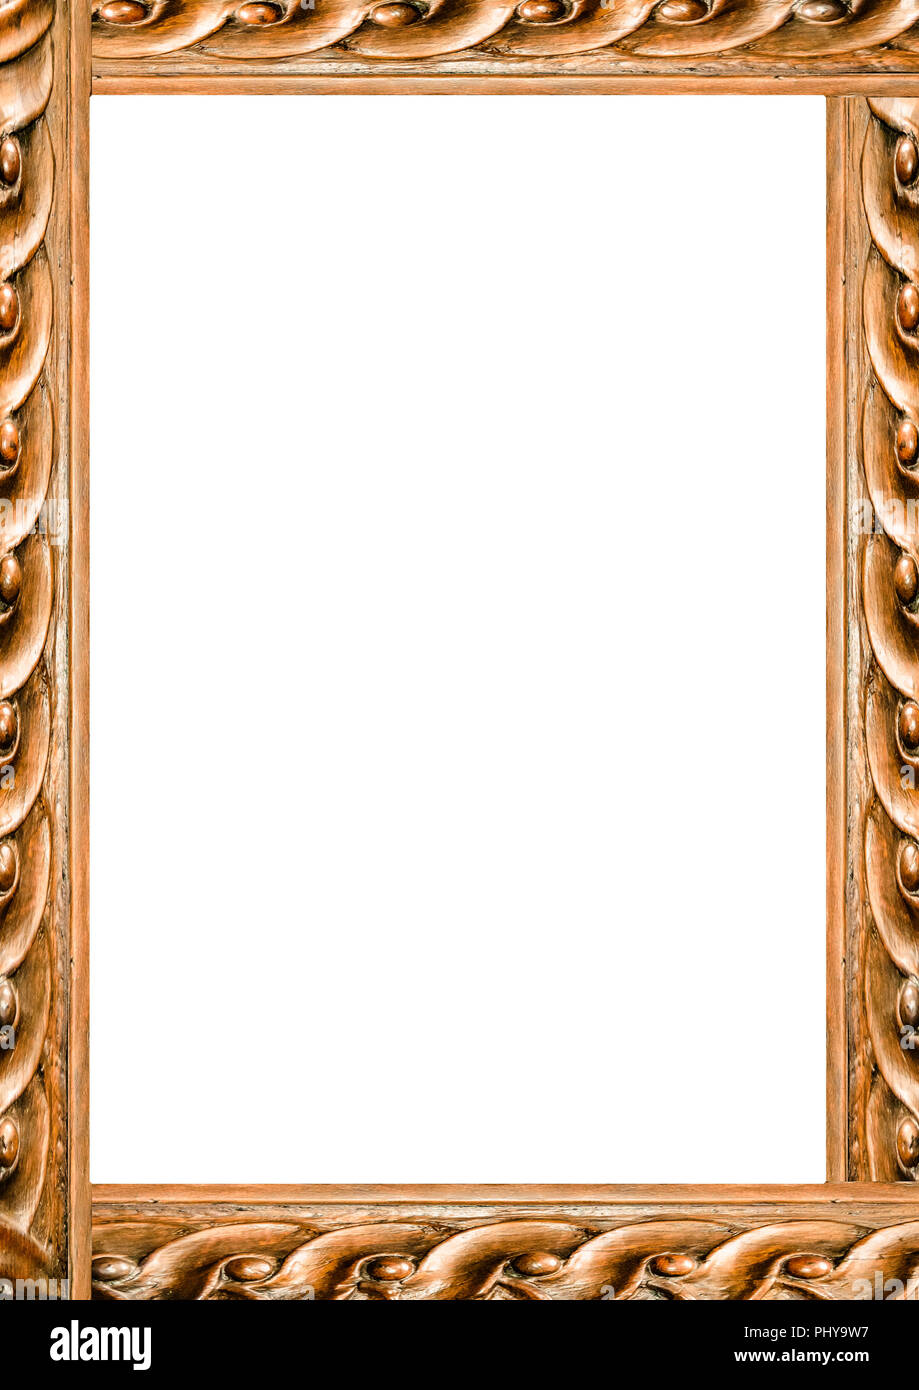 White frame background with decorated design borders Stock Photo - Alamy